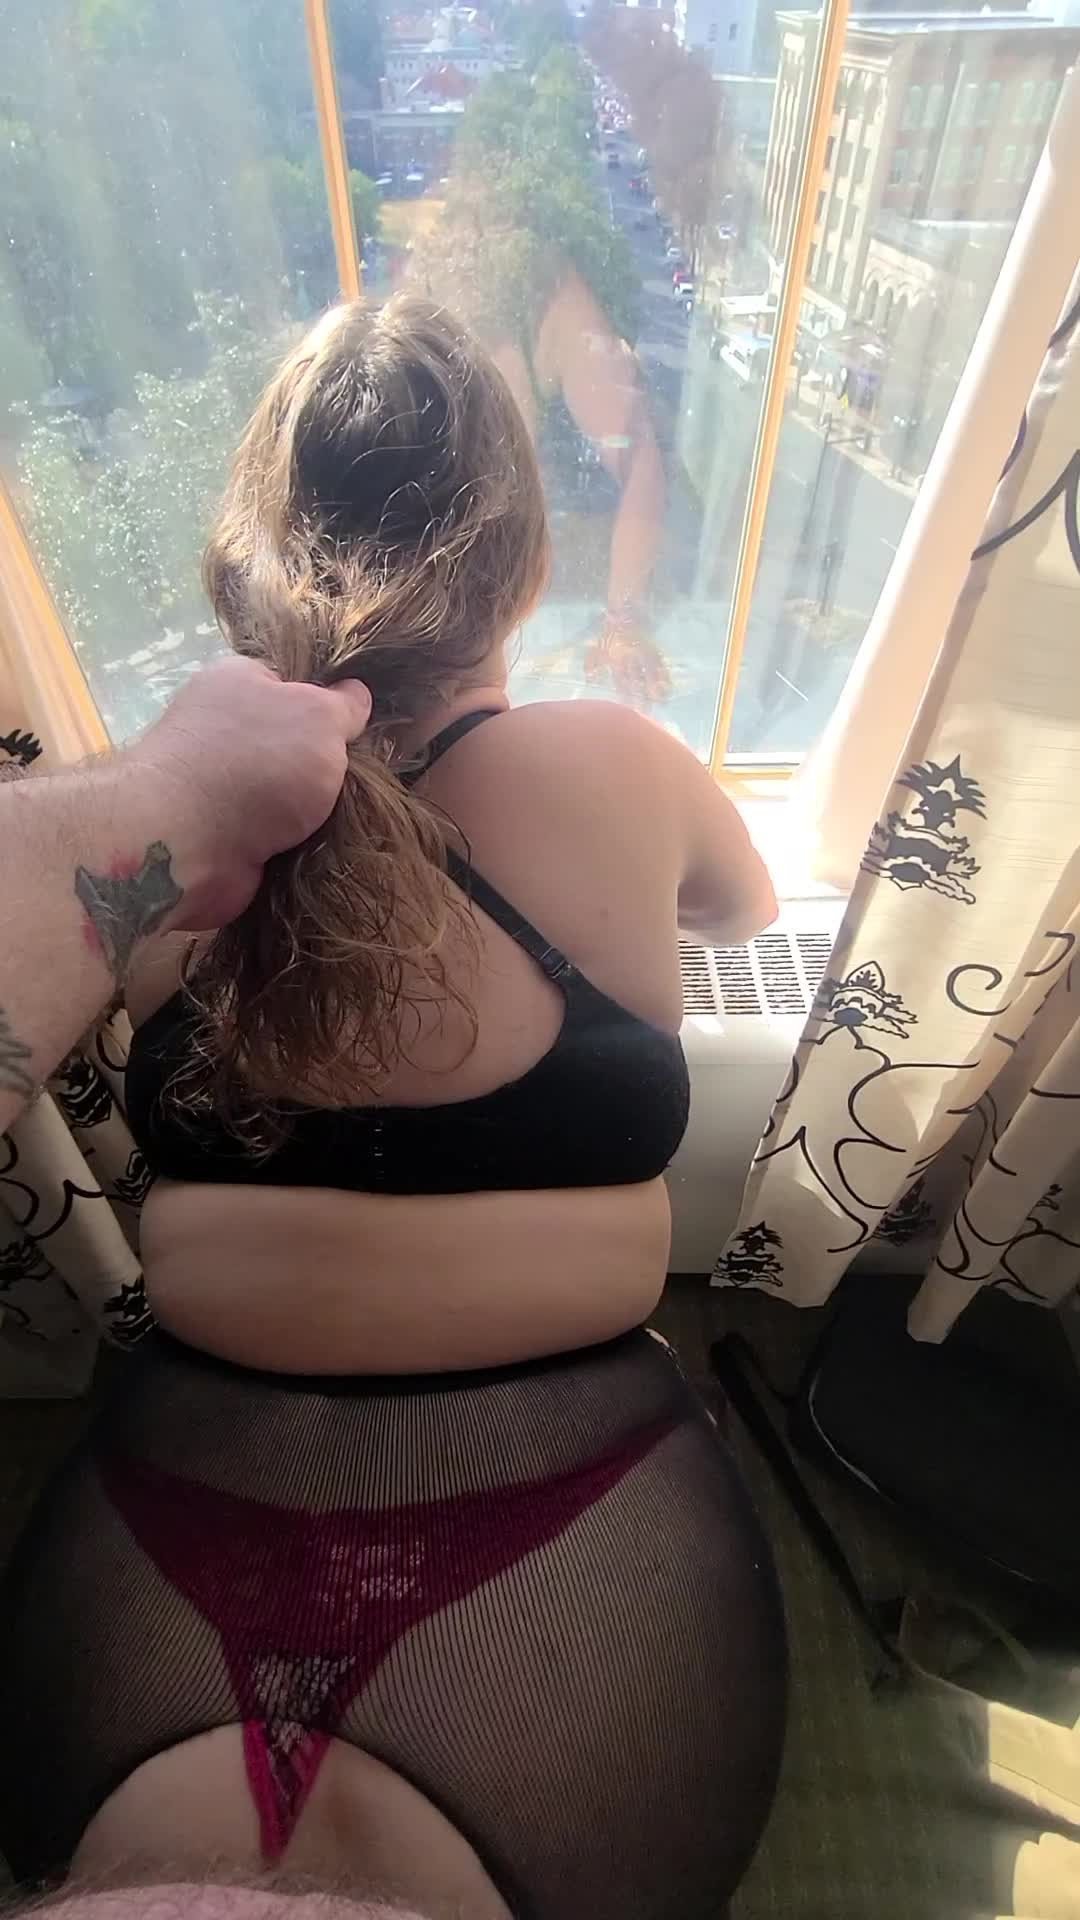 Video by ExhibCouplePlayTime with the username @ExhibCouplePlayTime, who is a verified user,  January 7, 2024 at 7:13 PM. The post is about the topic MILF and the text says 'Cum in me while I look out the window! Hope eveyone on the street enjoyed the show!'